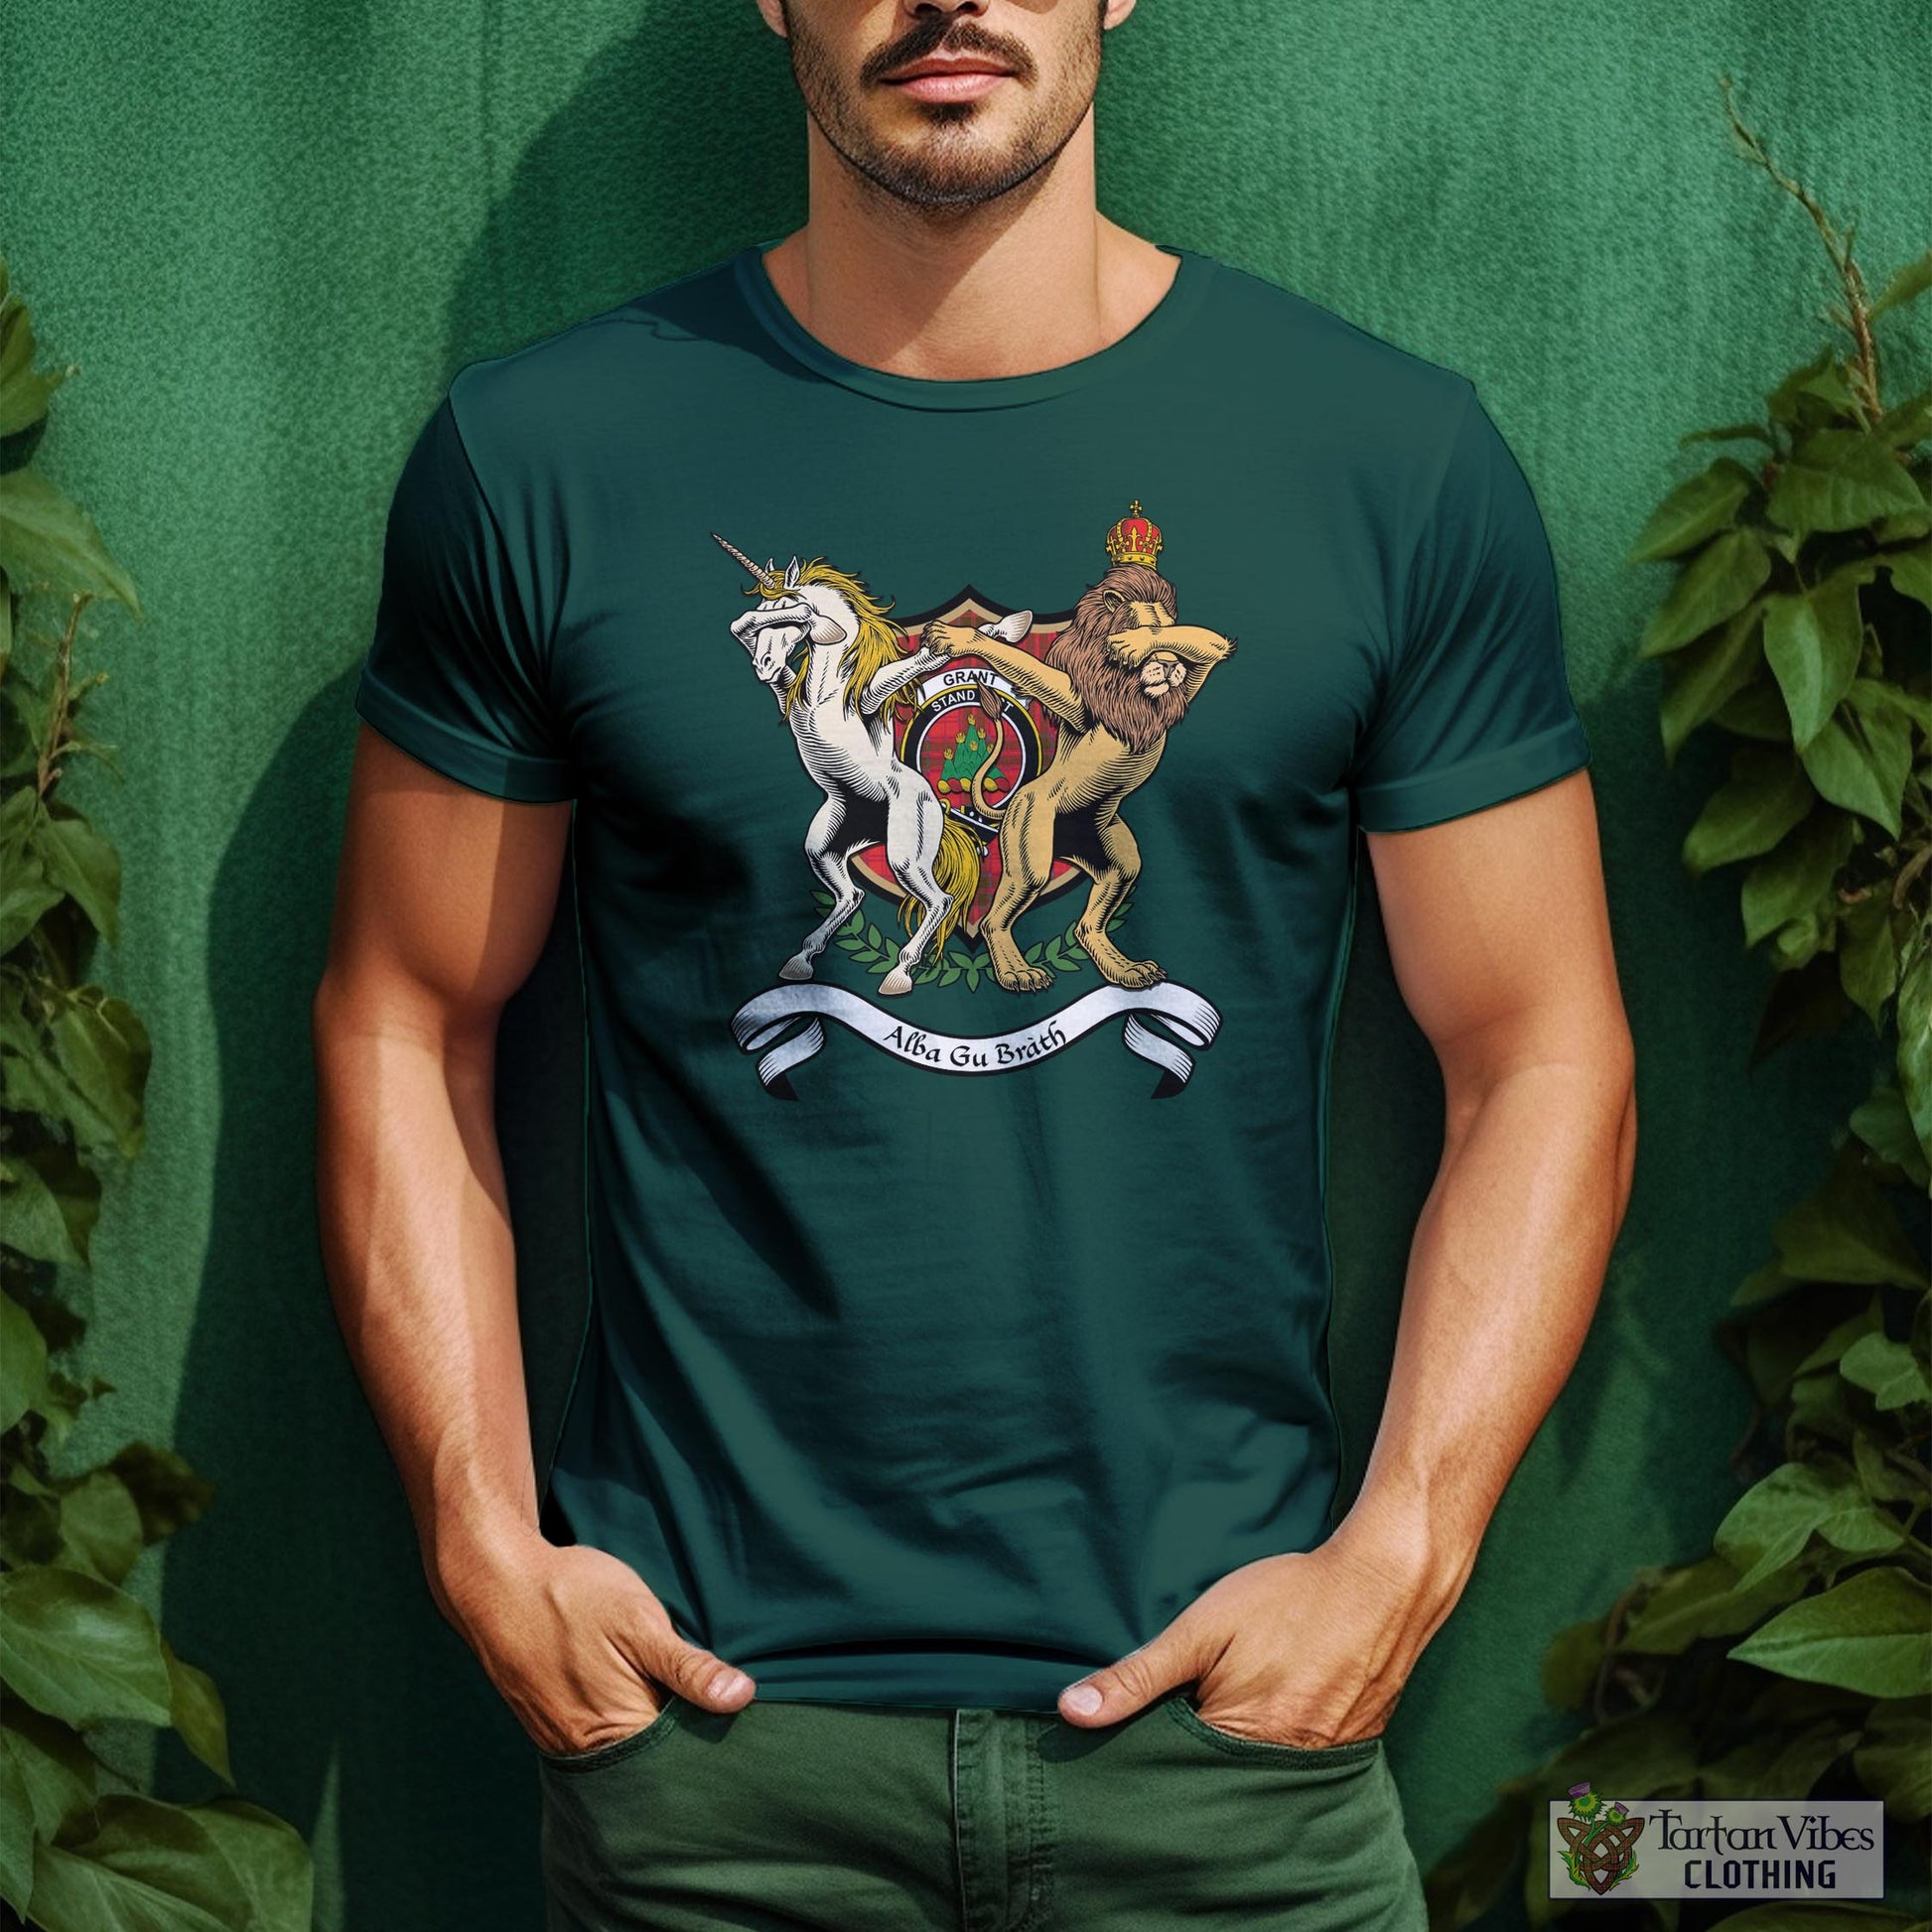 Tartan Vibes Clothing Grant Weathered Family Crest Cotton Men's T-Shirt with Scotland Royal Coat Of Arm Funny Style